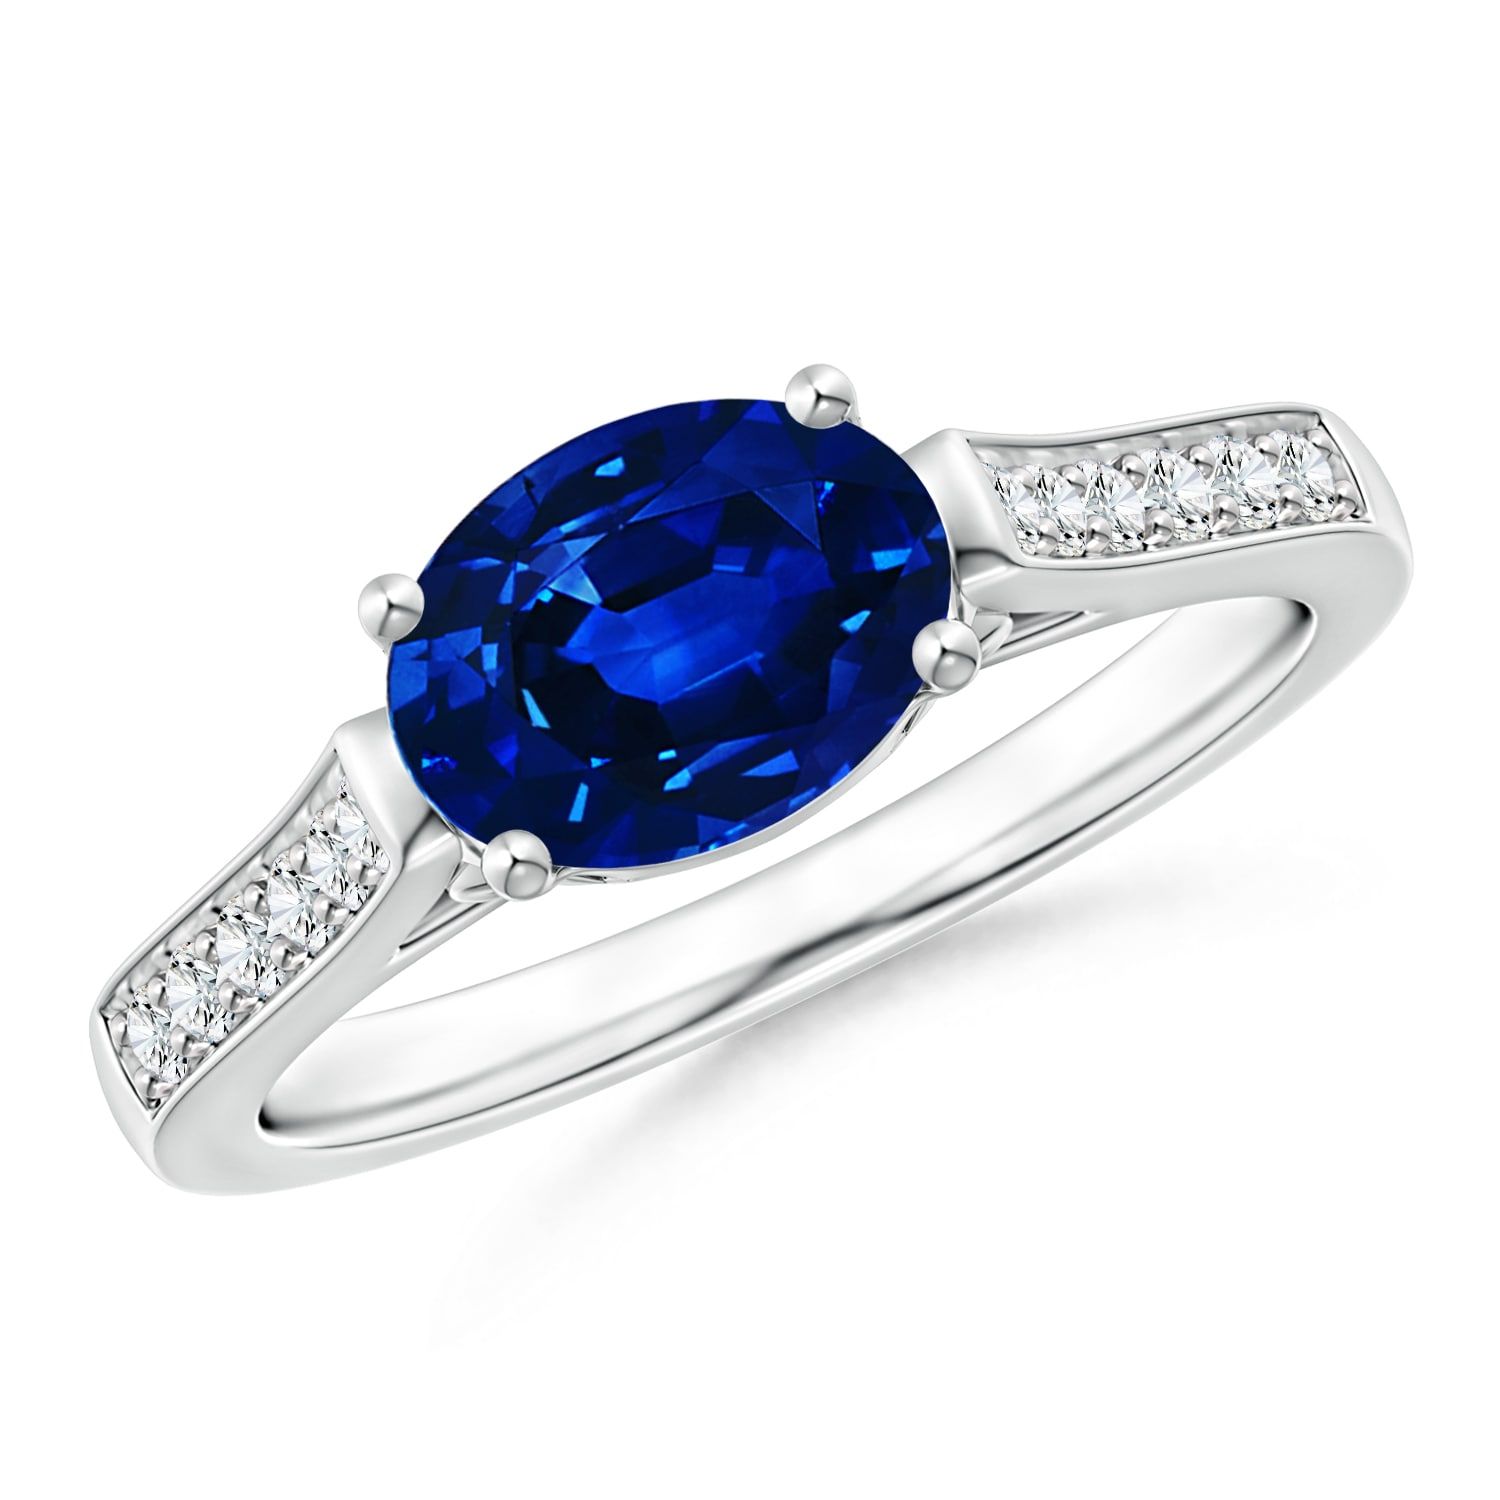 September Birthstone Ring – East West Oval Blue Sapphire Solitaire Ring  With Diamonds In Platinum (8x6mm Blue Sapphire) – Sr0737sd Pt Aaaa 8x6 5 –  Walmart Regarding East West Oval Sapphire Rings (View 5 of 25)